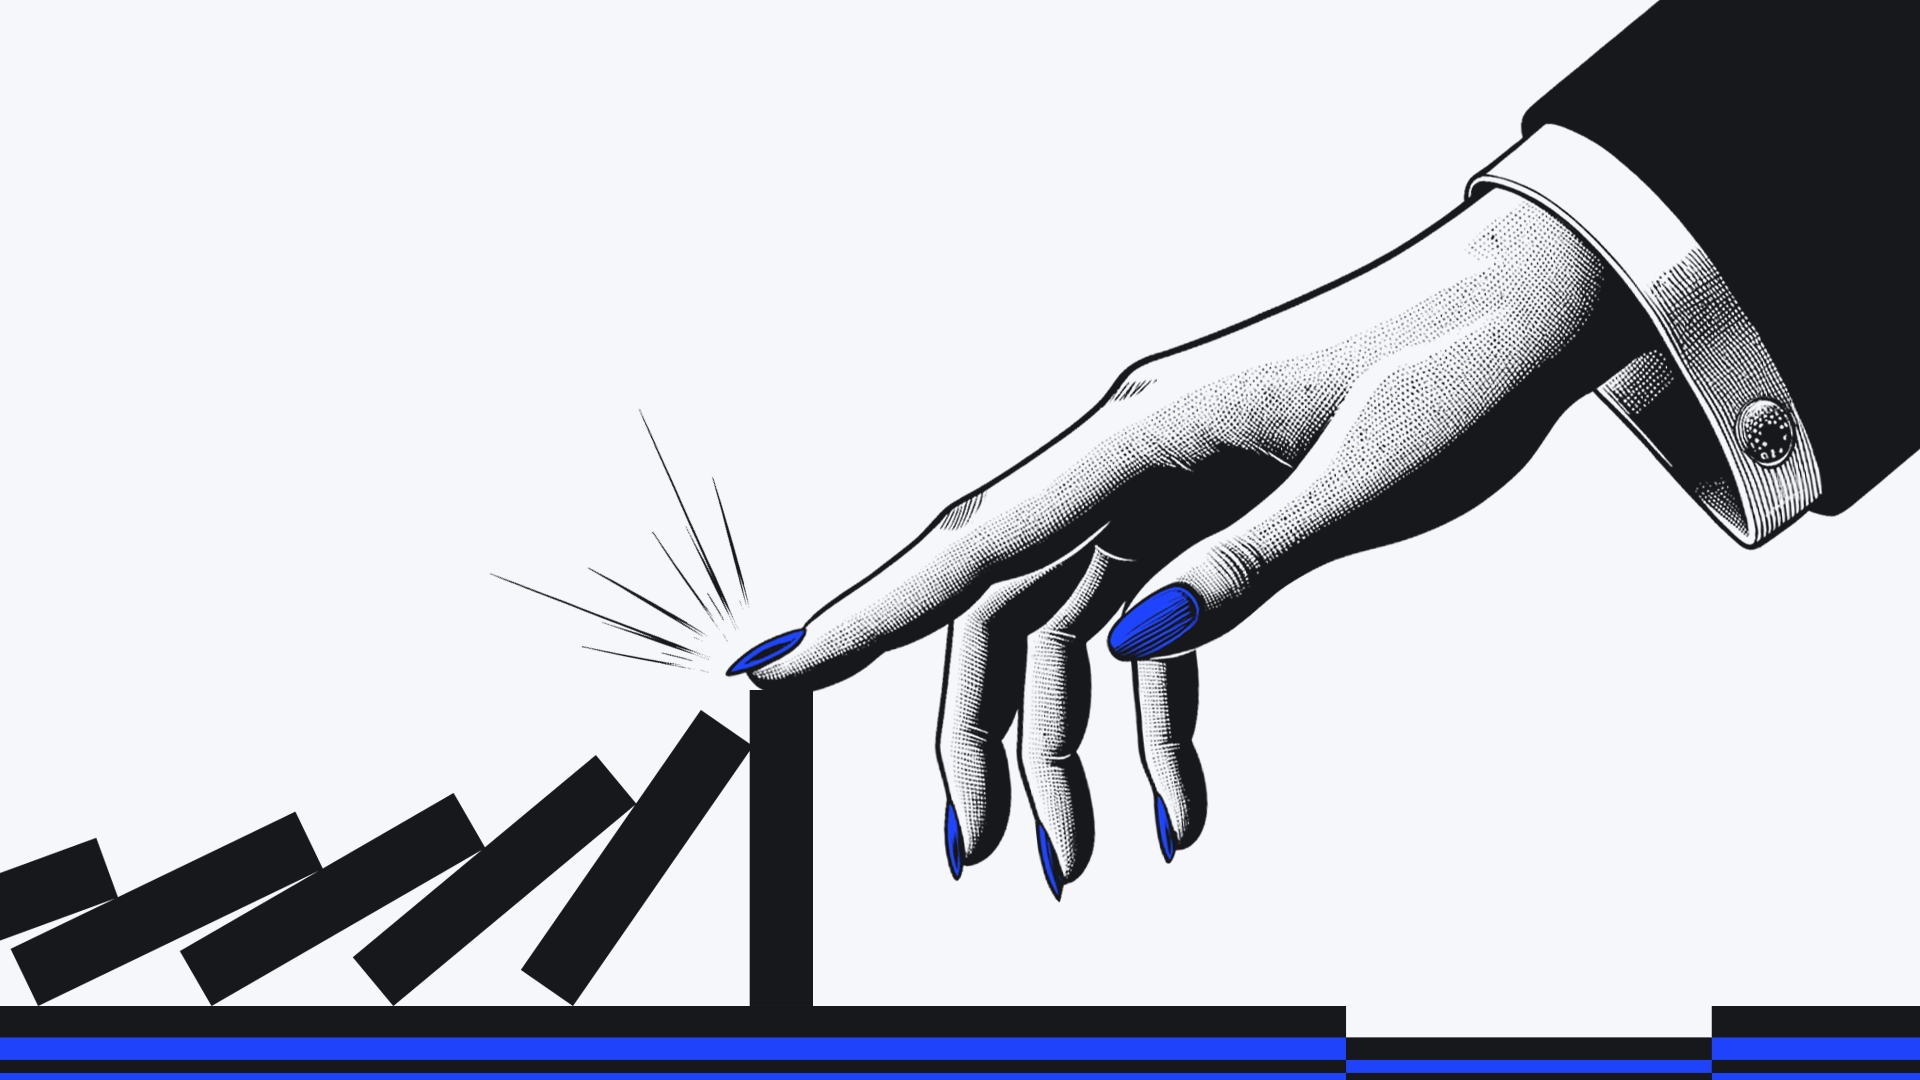 A stylized black and white image of a hand with blue nails stopping the last domino in a series.